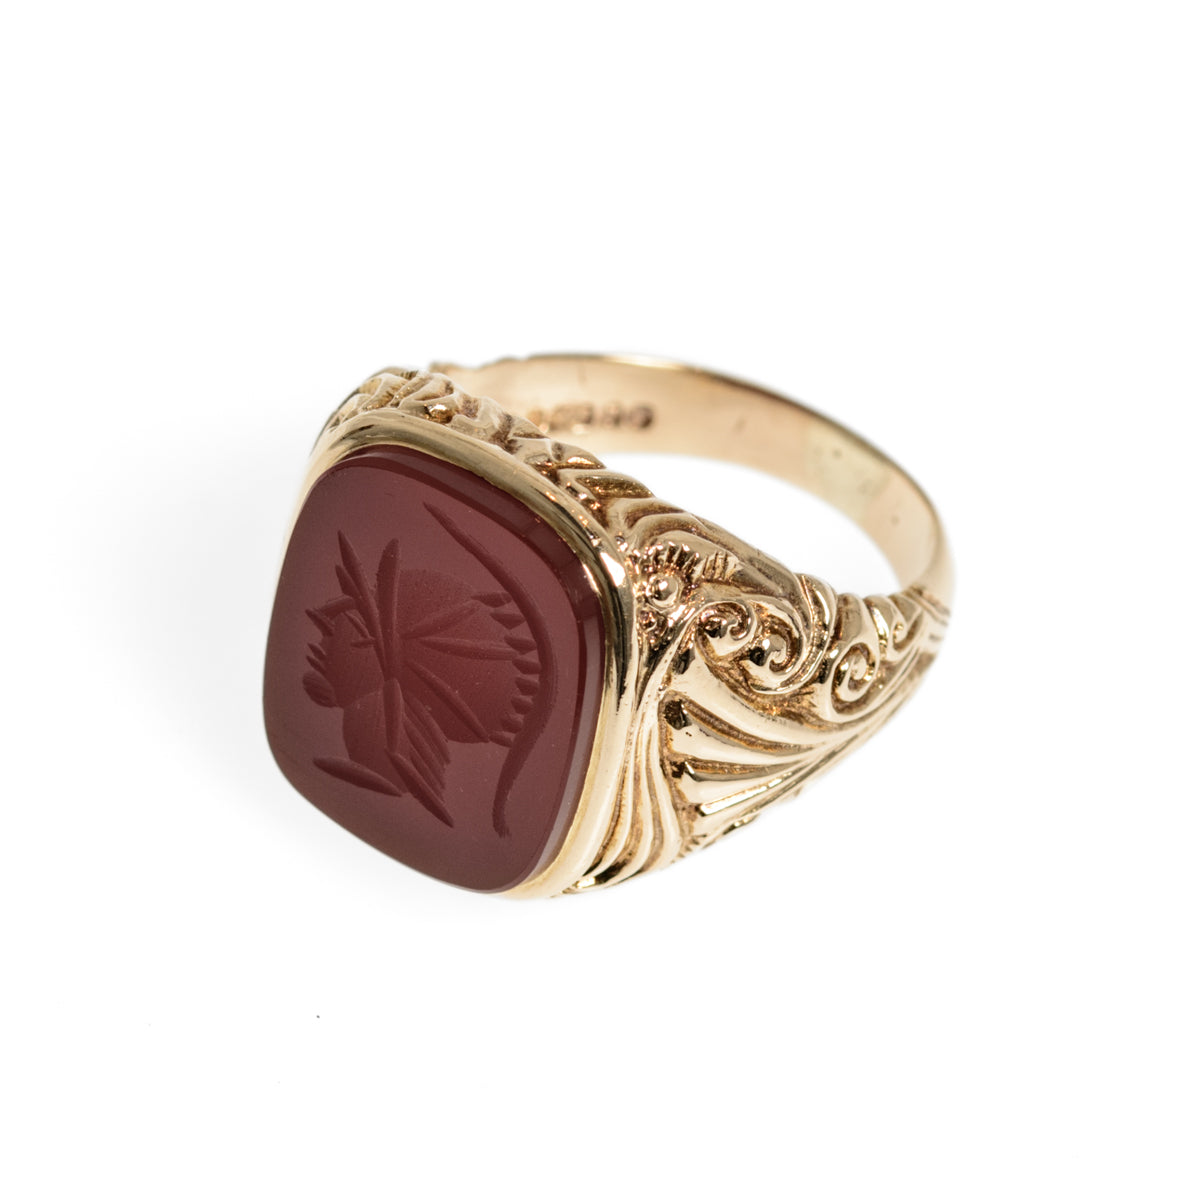 Vintage 9ct Gold Intaglio Signet Seal Ring With Centurion In Carnelian Stone UK Size R1/2 London Hallmark 1971 (Code A1001)